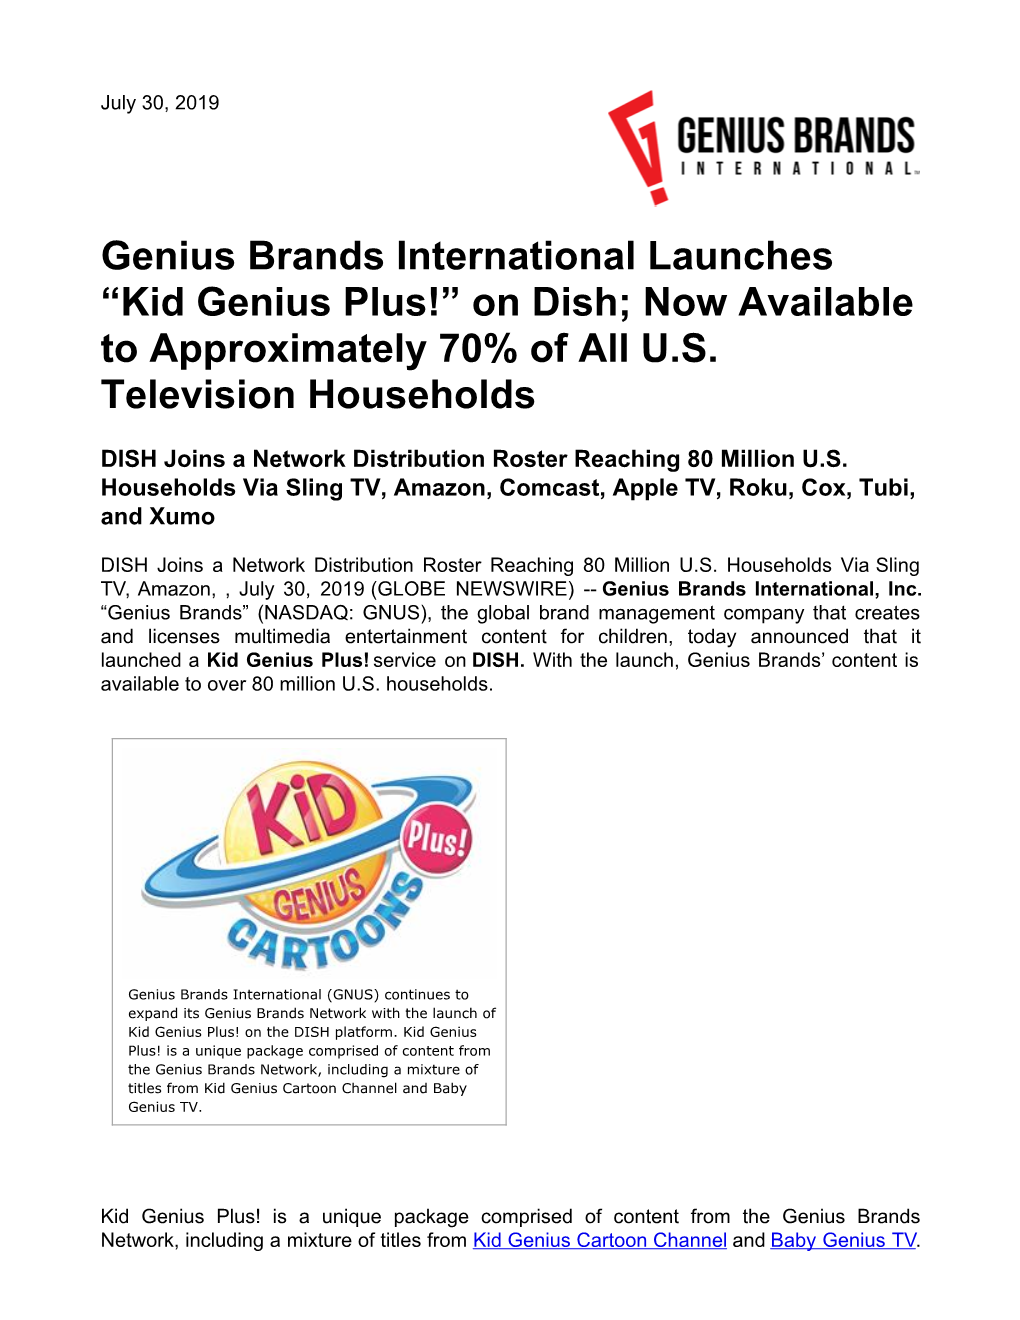 Genius Brands International Launches “Kid Genius Plus!” on Dish; Now Available to Approximately 70% of All U.S